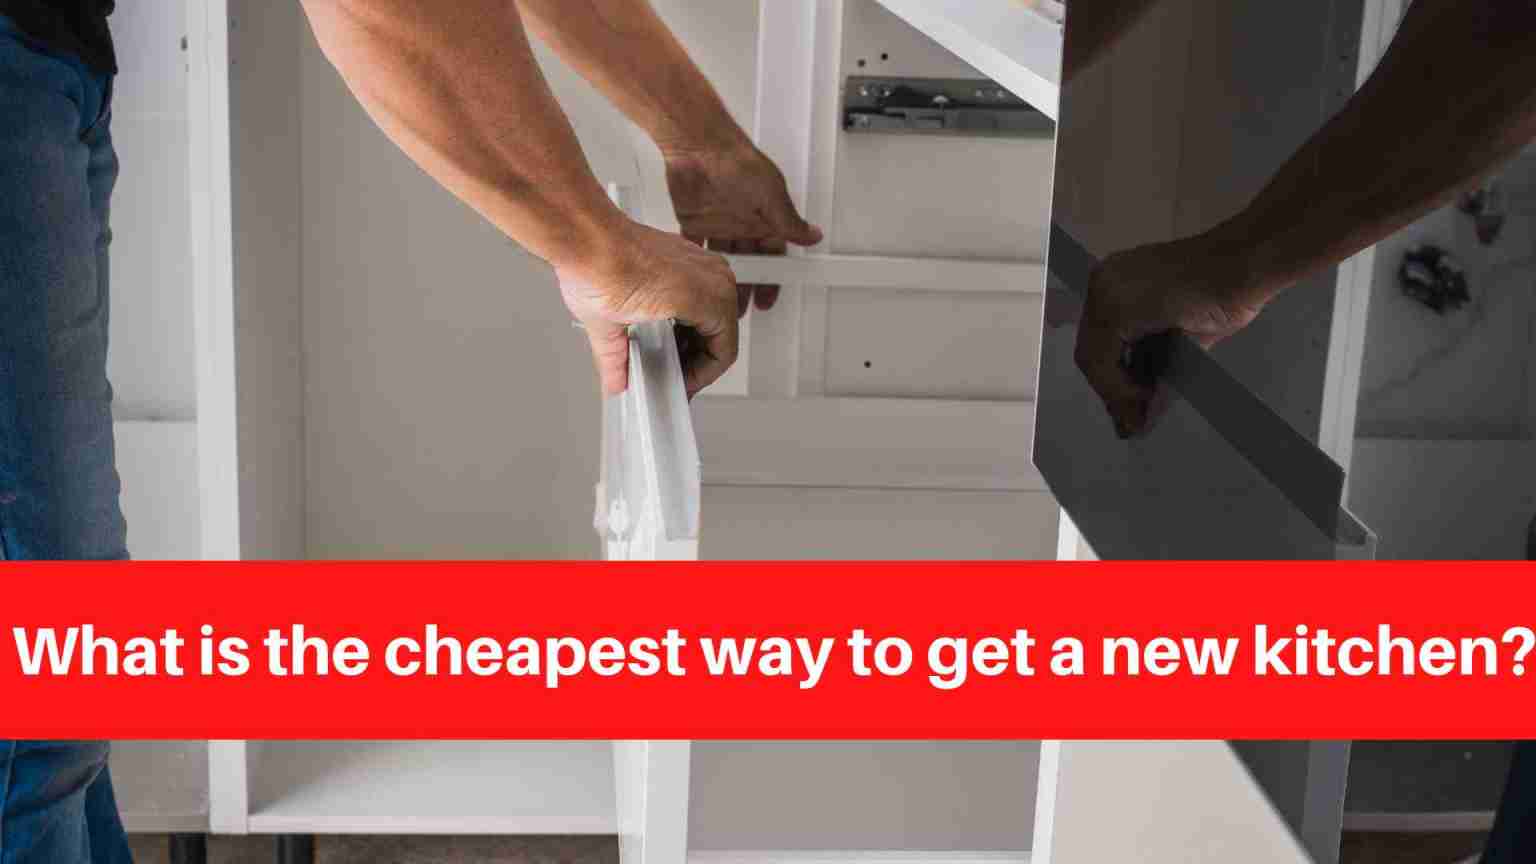 What is the cheapest way to get a new kitchen